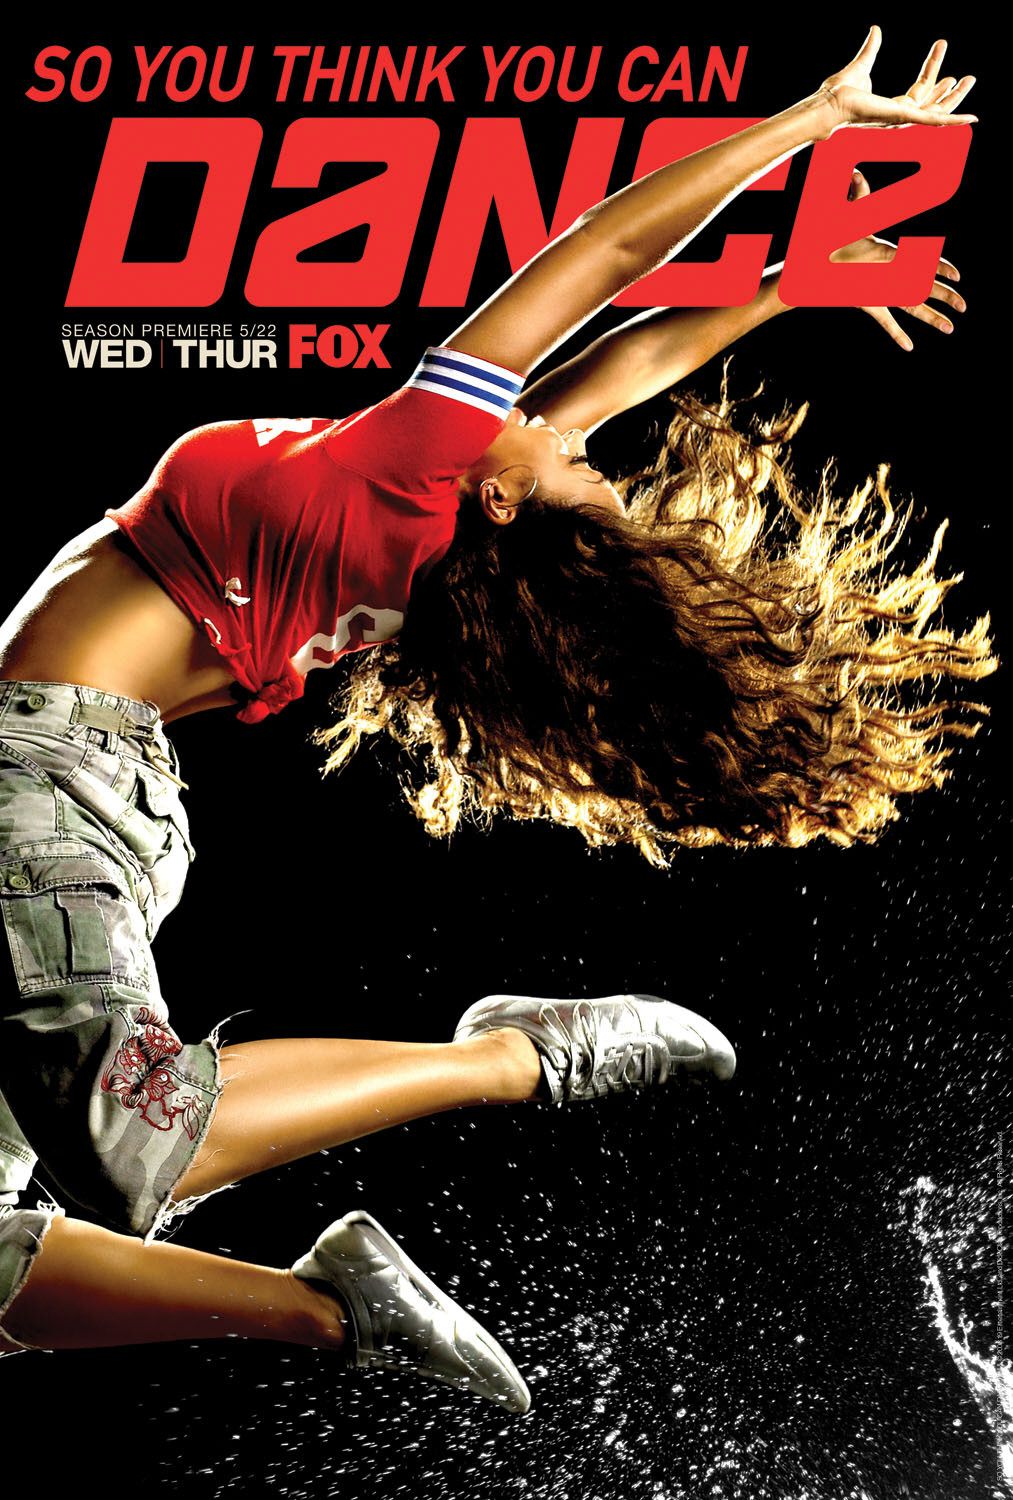 Extra Large TV Poster Image for So You Think You Can Dance (#5 of 32)